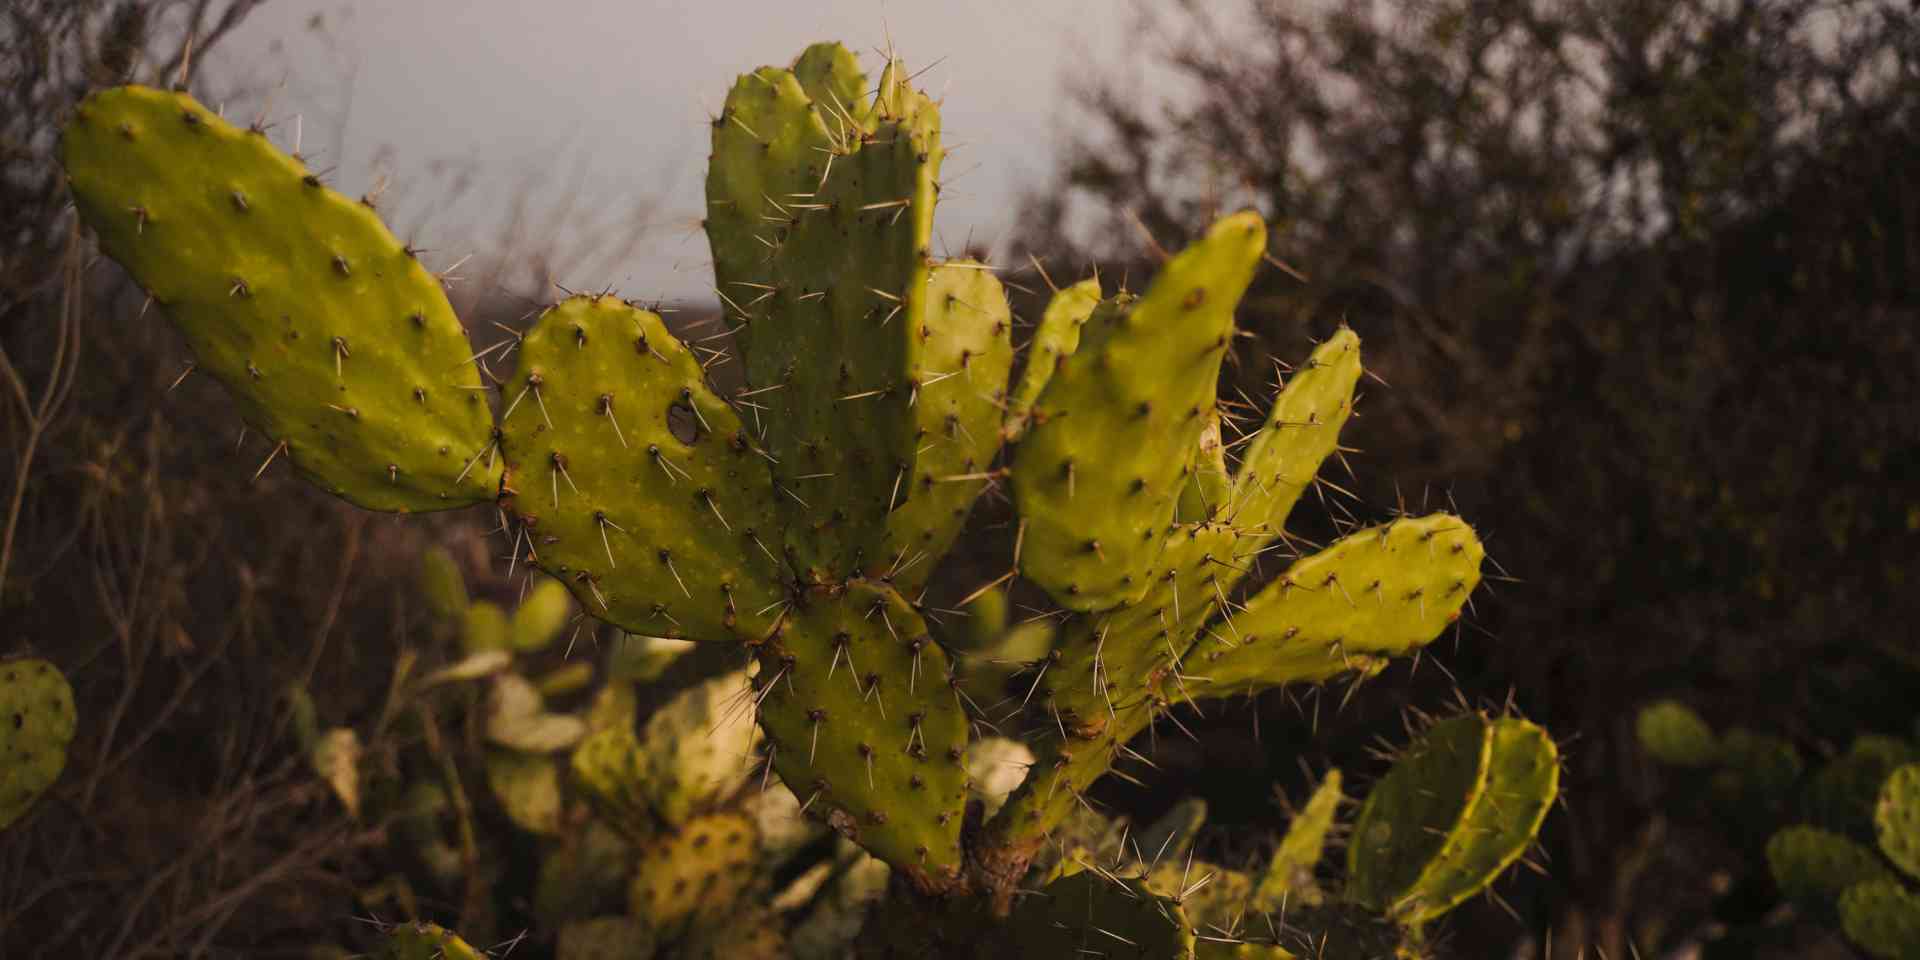 ITOCO signs agreement on Nopal Cactus Plantations in Mexico - diego-lozano-Xobsjrz0J78-unsplash